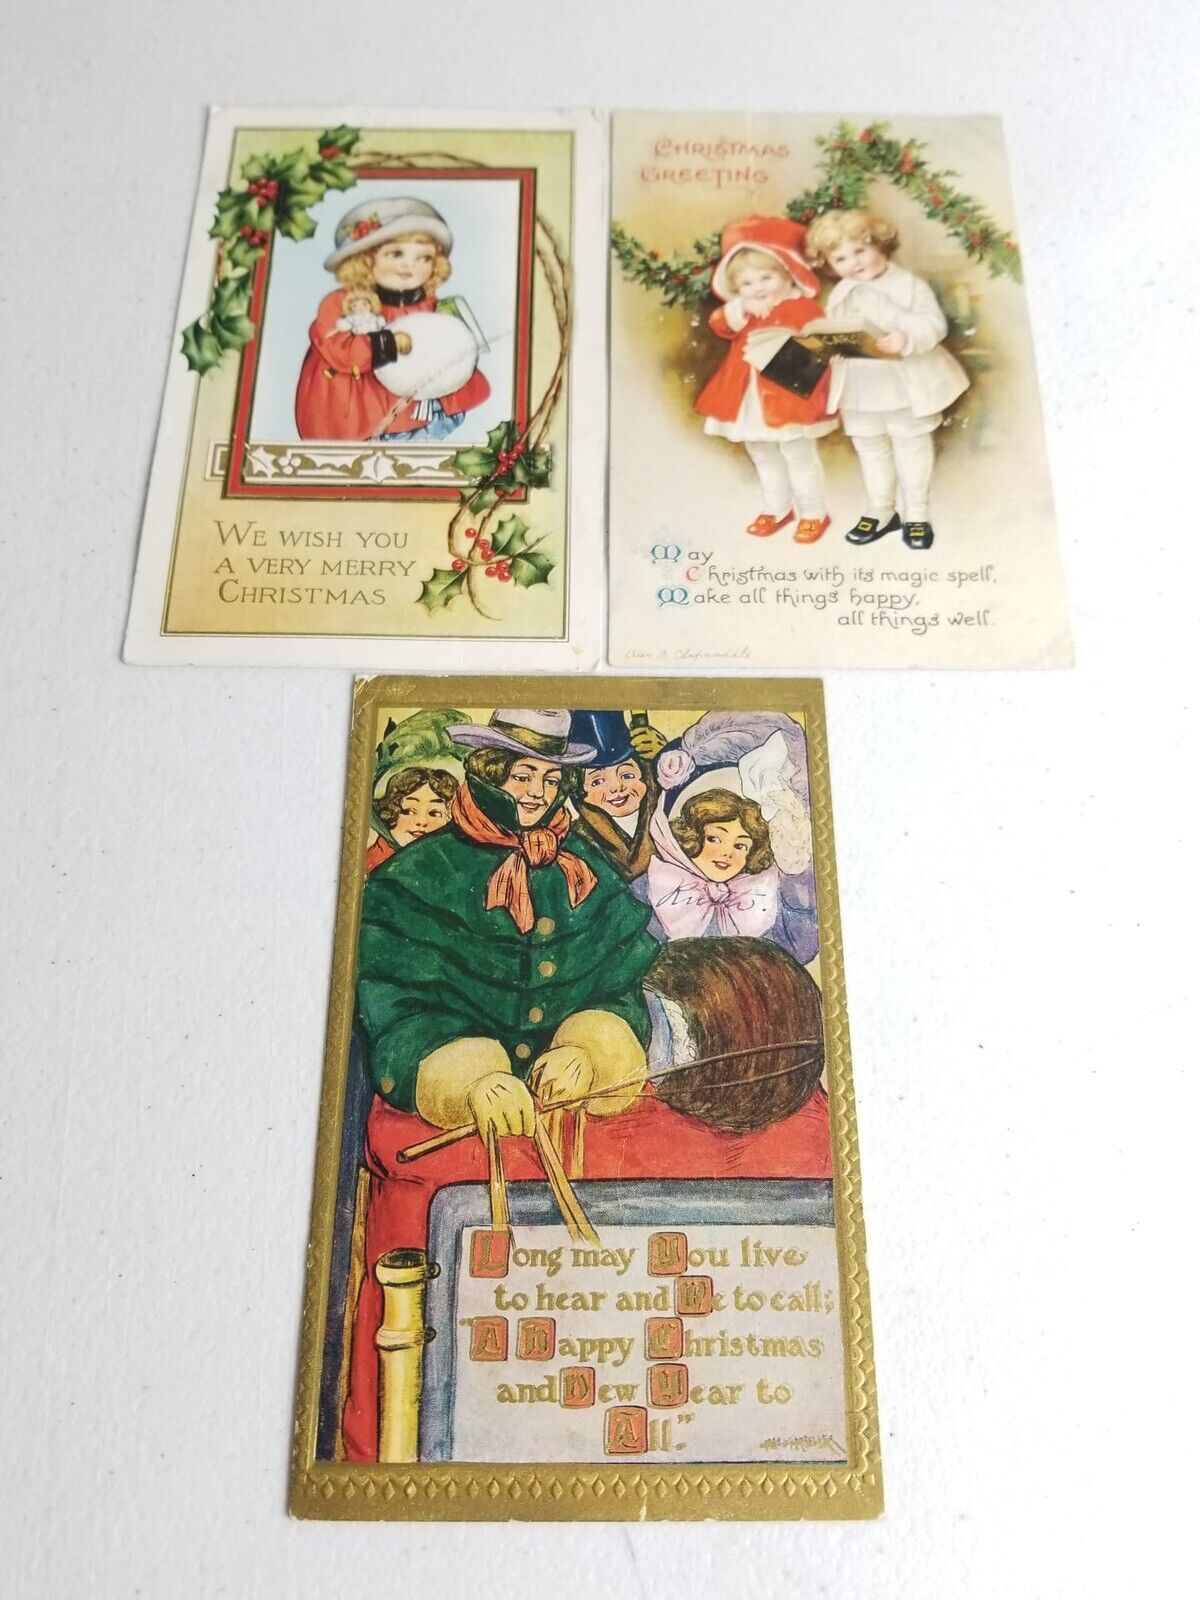 Charming Early 1900s Vintage Christmas Postcard Collection - Lot of 3 Antiques Featuring Holiday Greetings - TreasuTiques